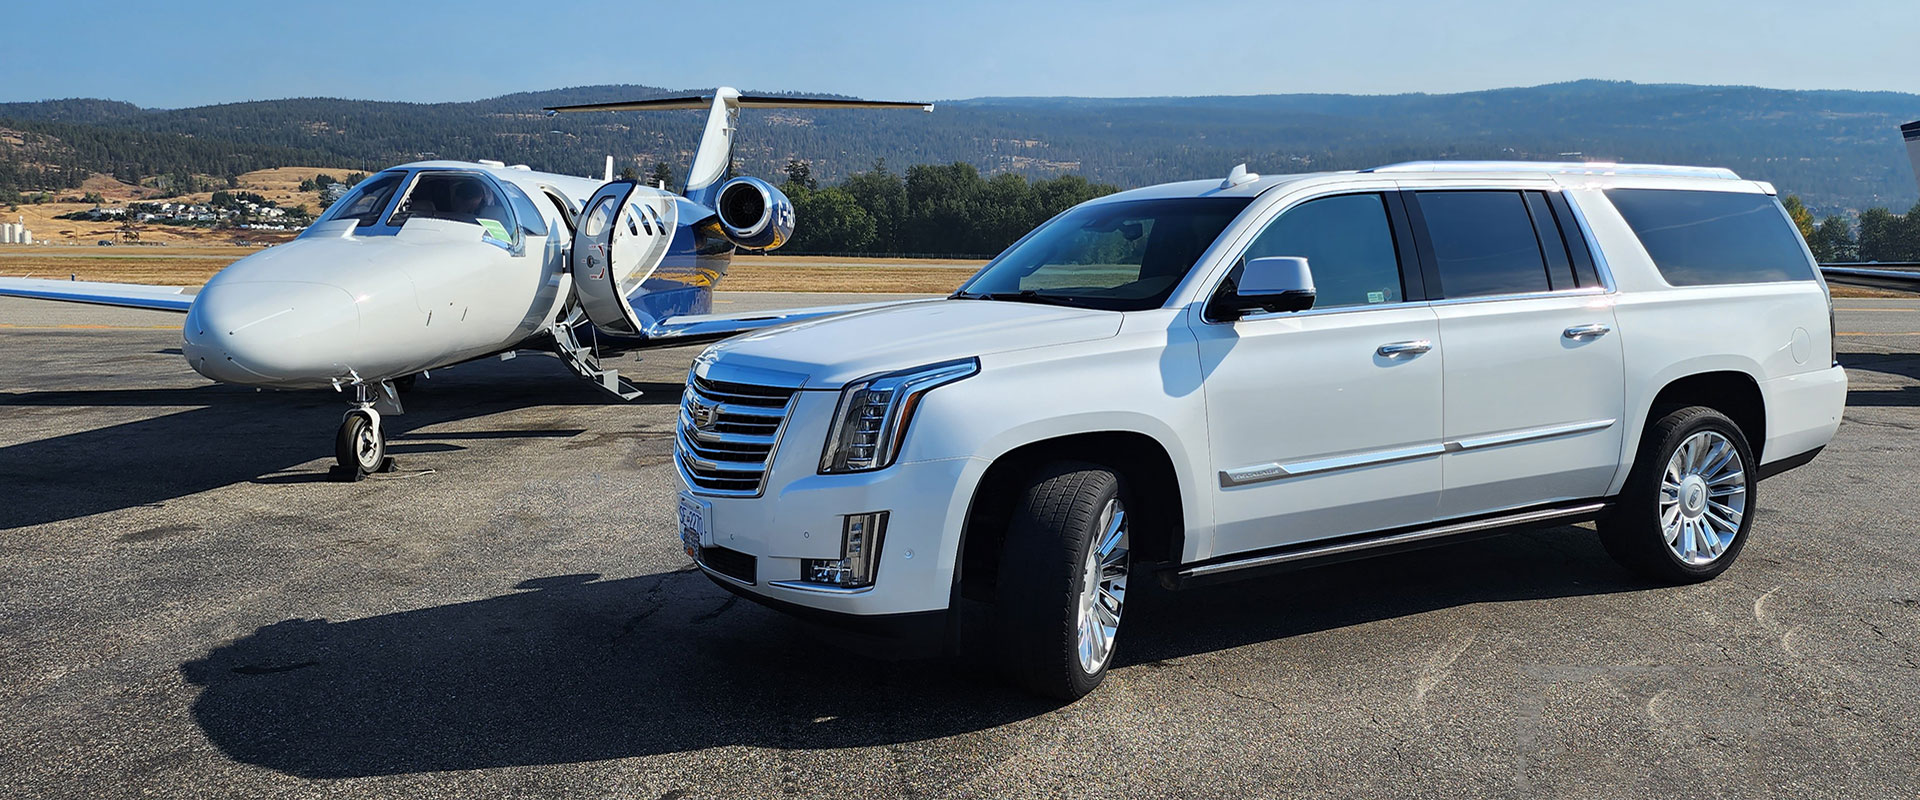 Need executive airport transfer service? Contact Okanagan Limousine to discuss your requirements. 